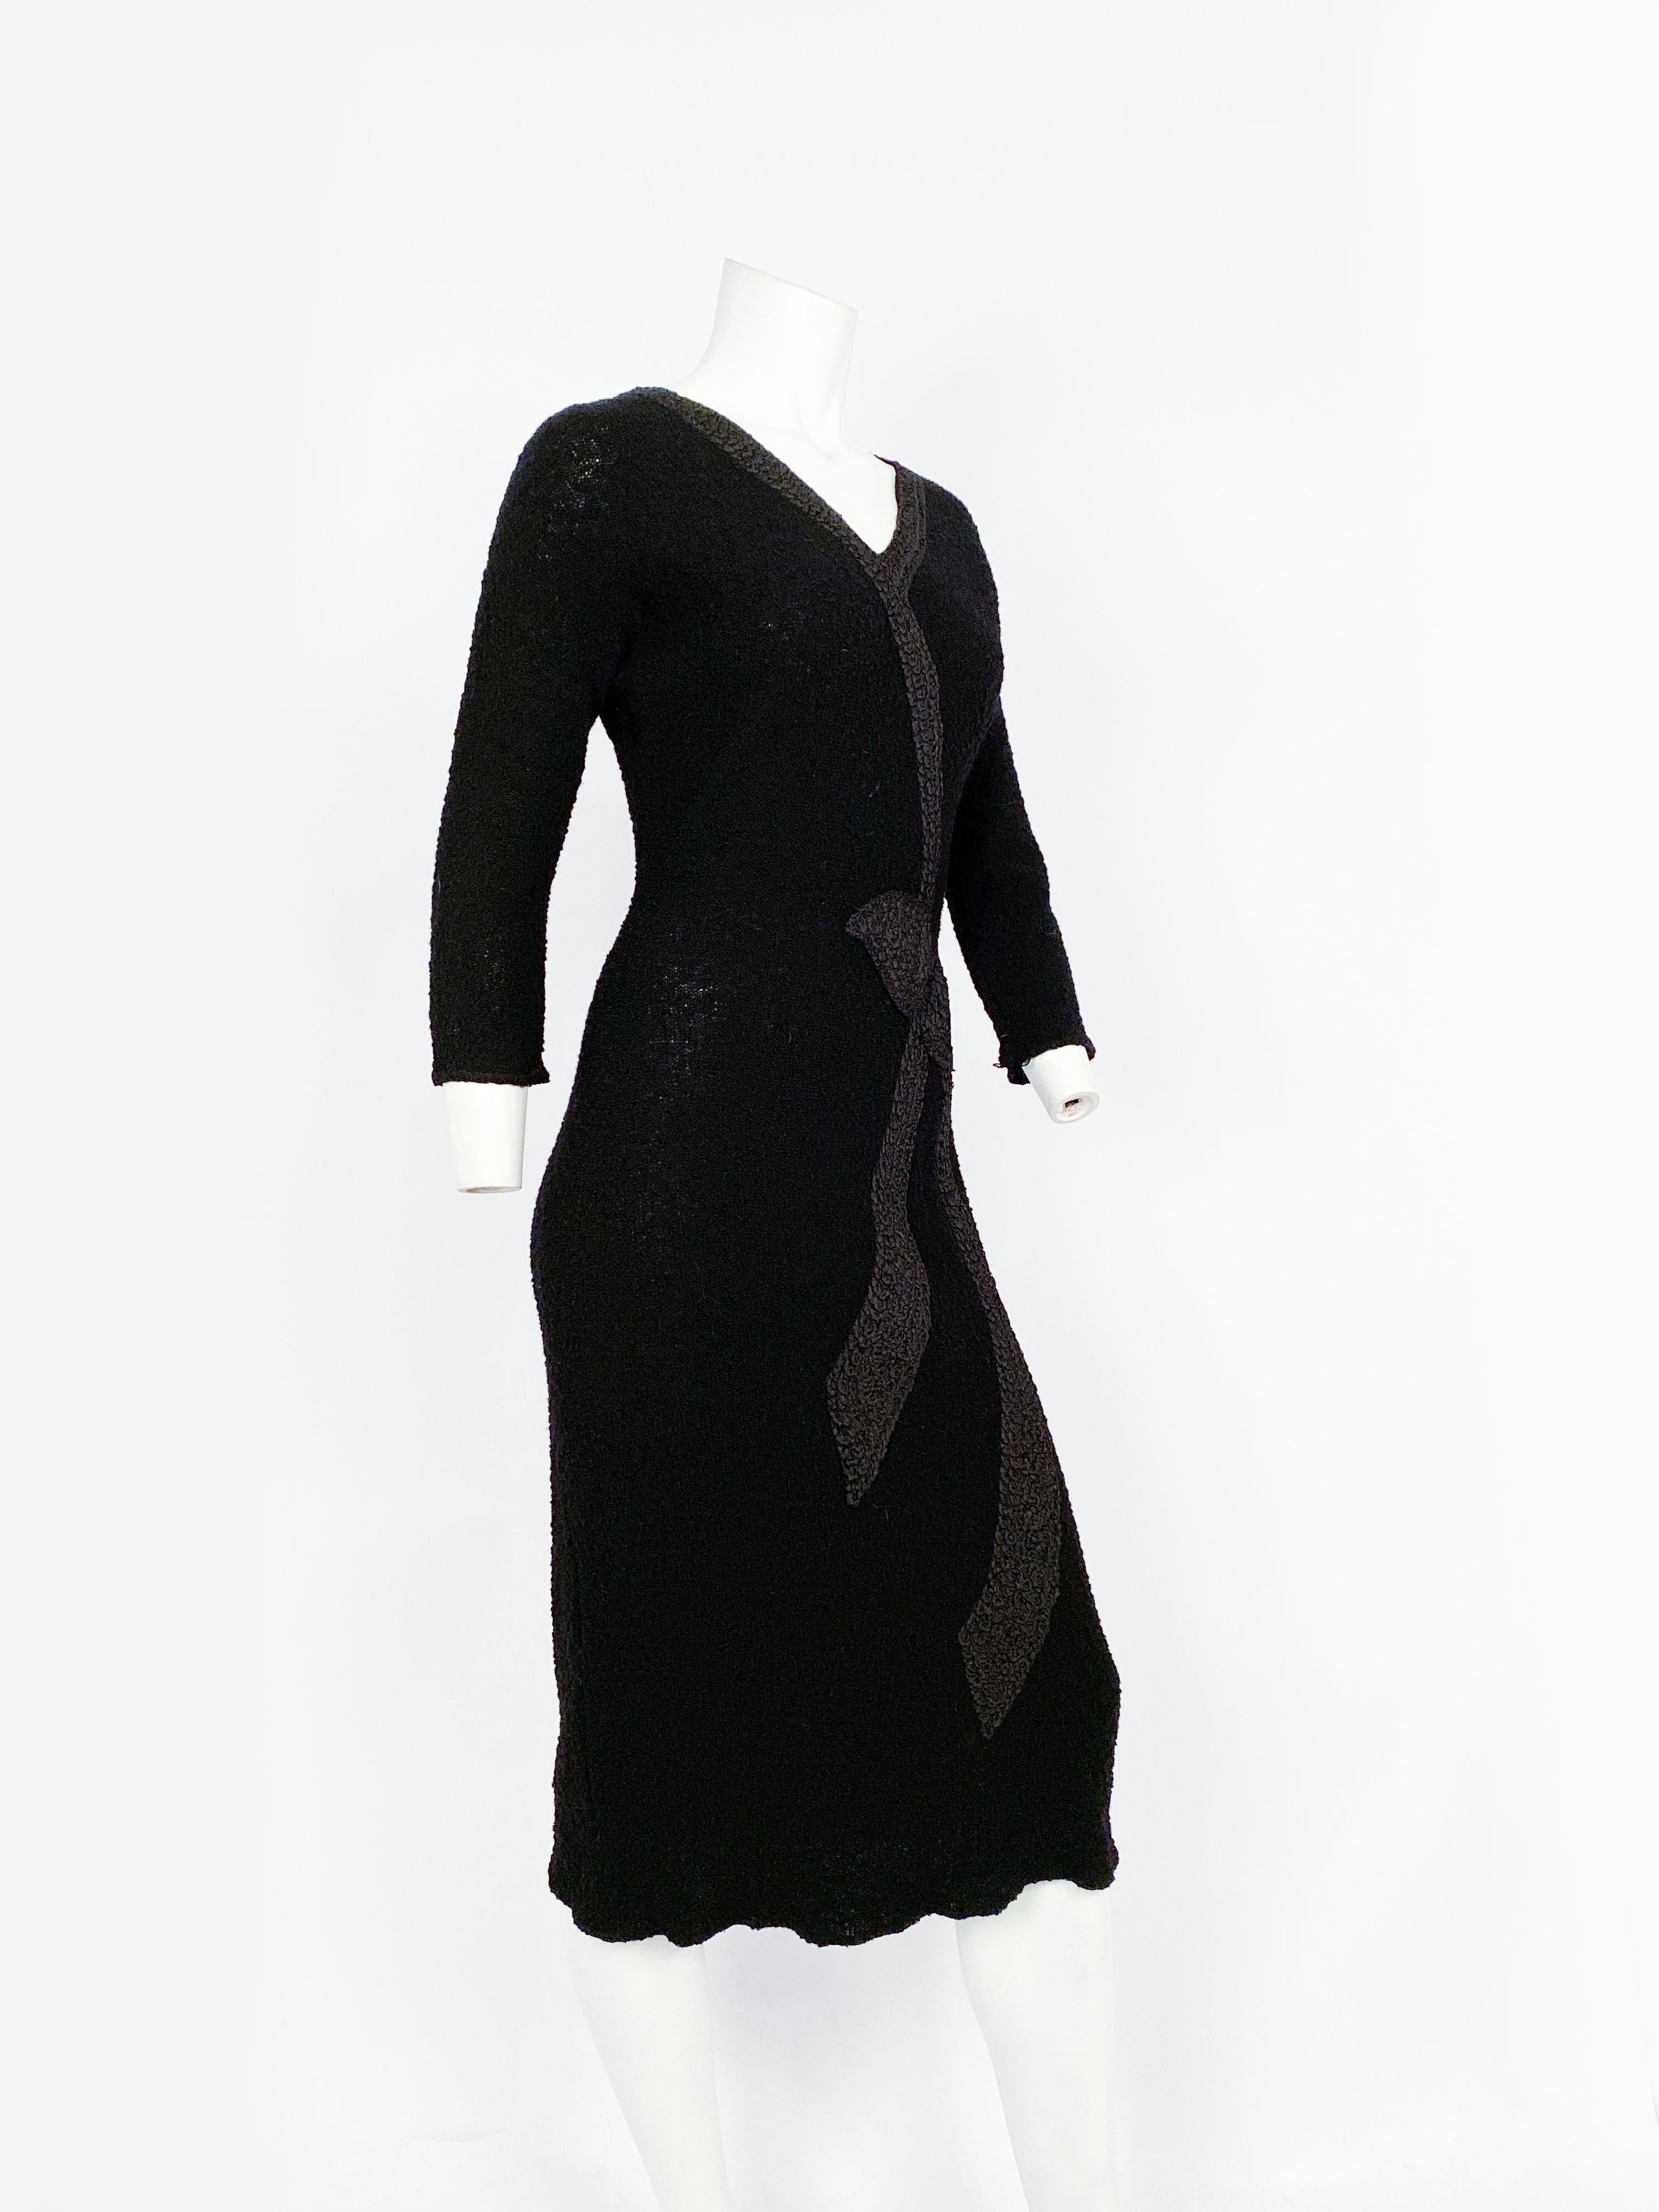 1950s Black Knit Dress with Trompe L'Oeil Ribbonwork In Good Condition For Sale In San Francisco, CA